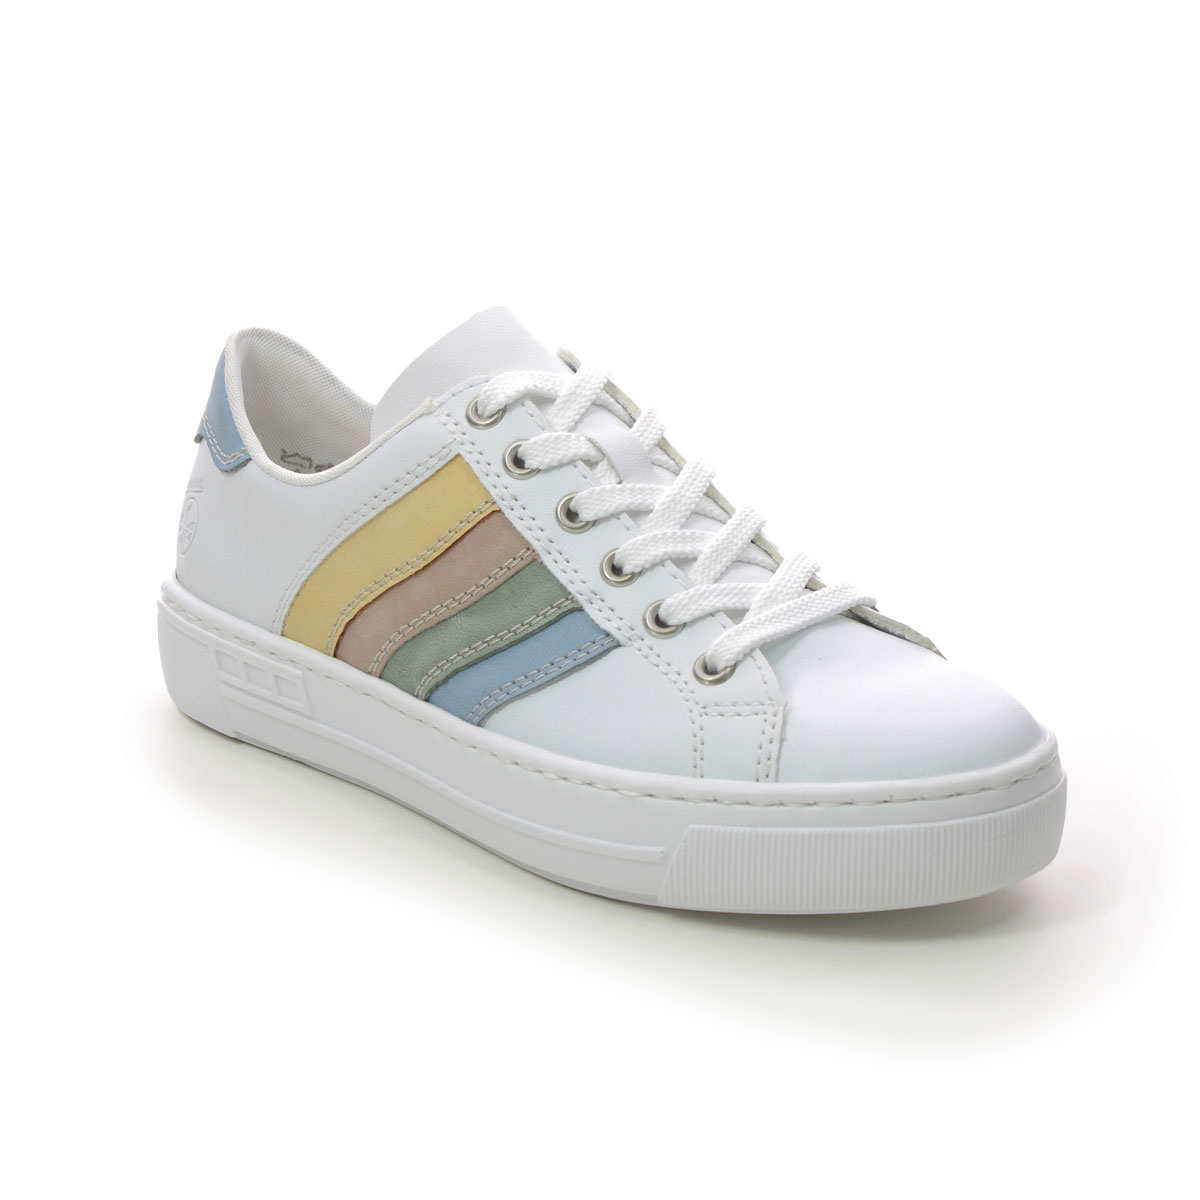 Rieker L8802-80 White multi Womens trainers in a Plain Man-made in Size 40